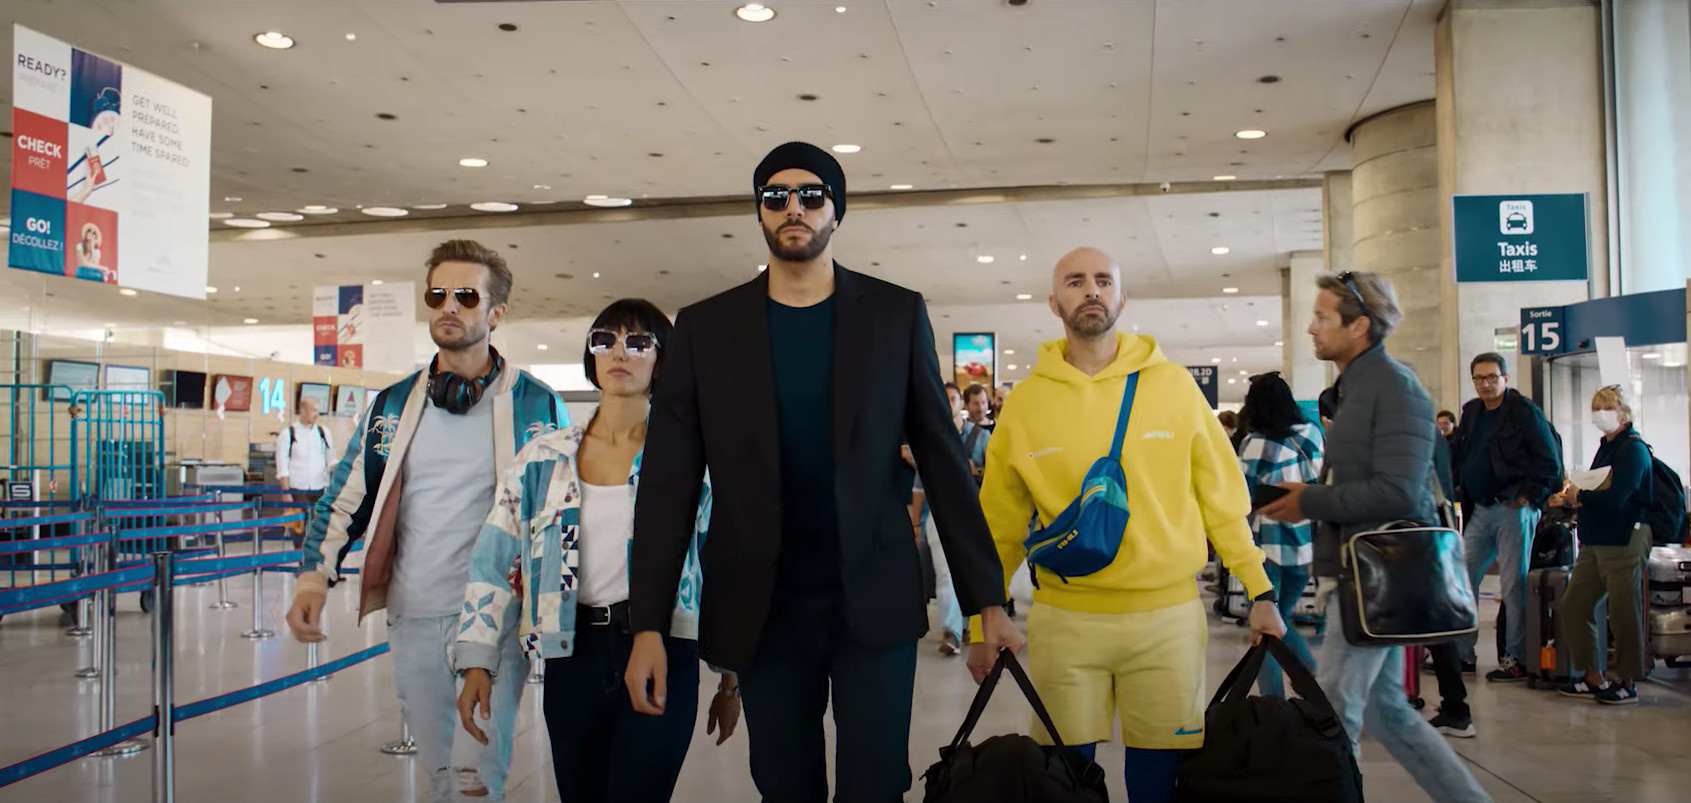 3 Jours Max, Tarek Boudali's new comedy: review and trailer